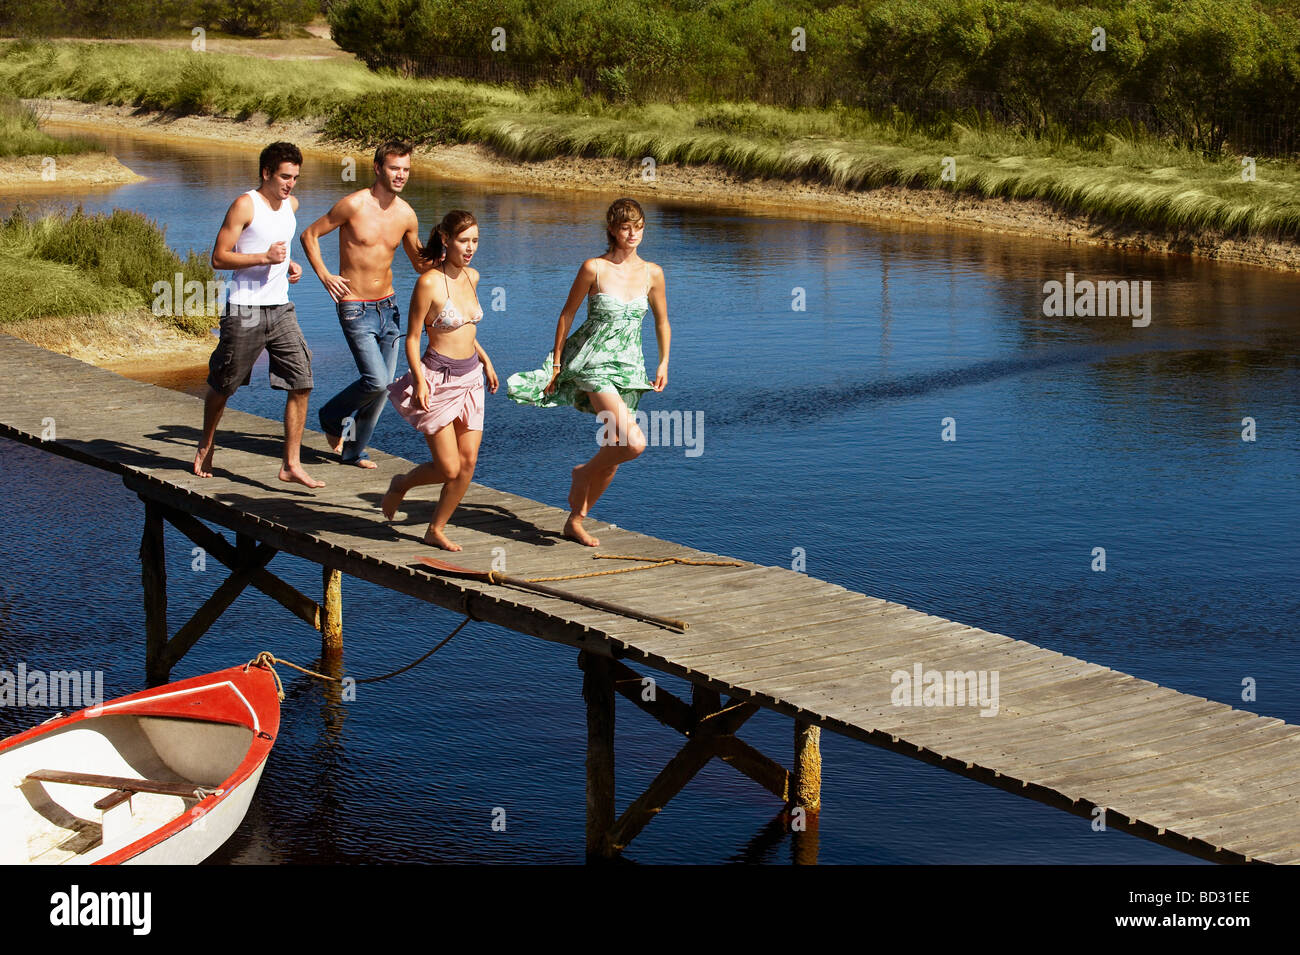 Group of young people running on jetty Stock Photo